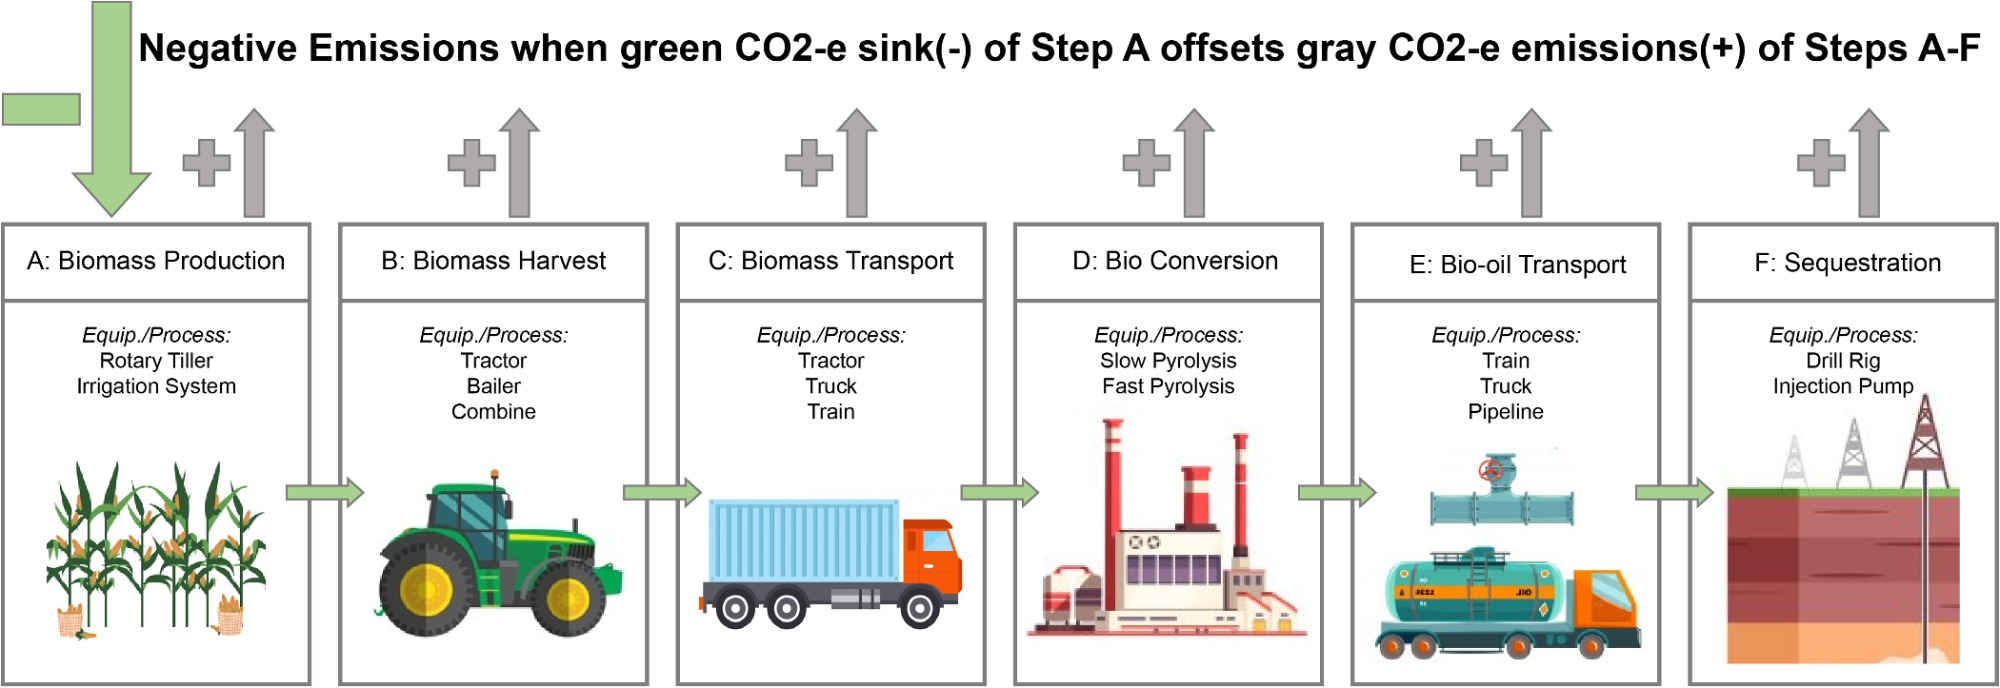 Negative emissions when green co2-e sink of step A offsets gray co2-e emissions of steps a-f